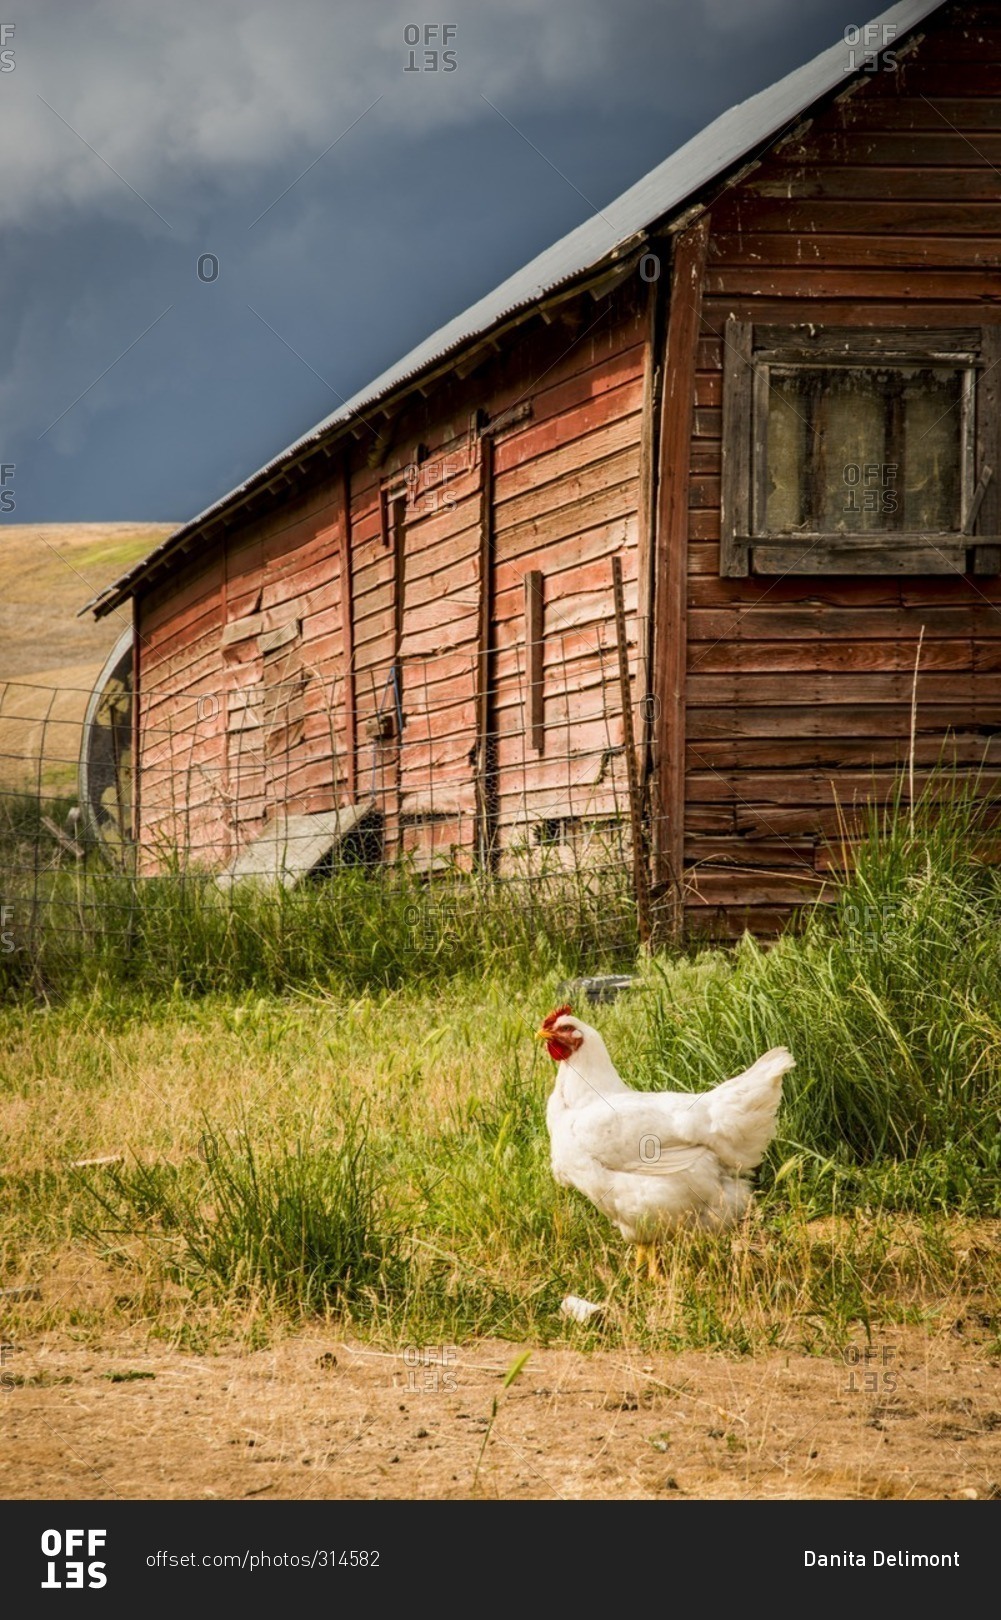 Pioneer Stock Farm, Dusty, approaching evening thunderstorm, chicken house and chickens